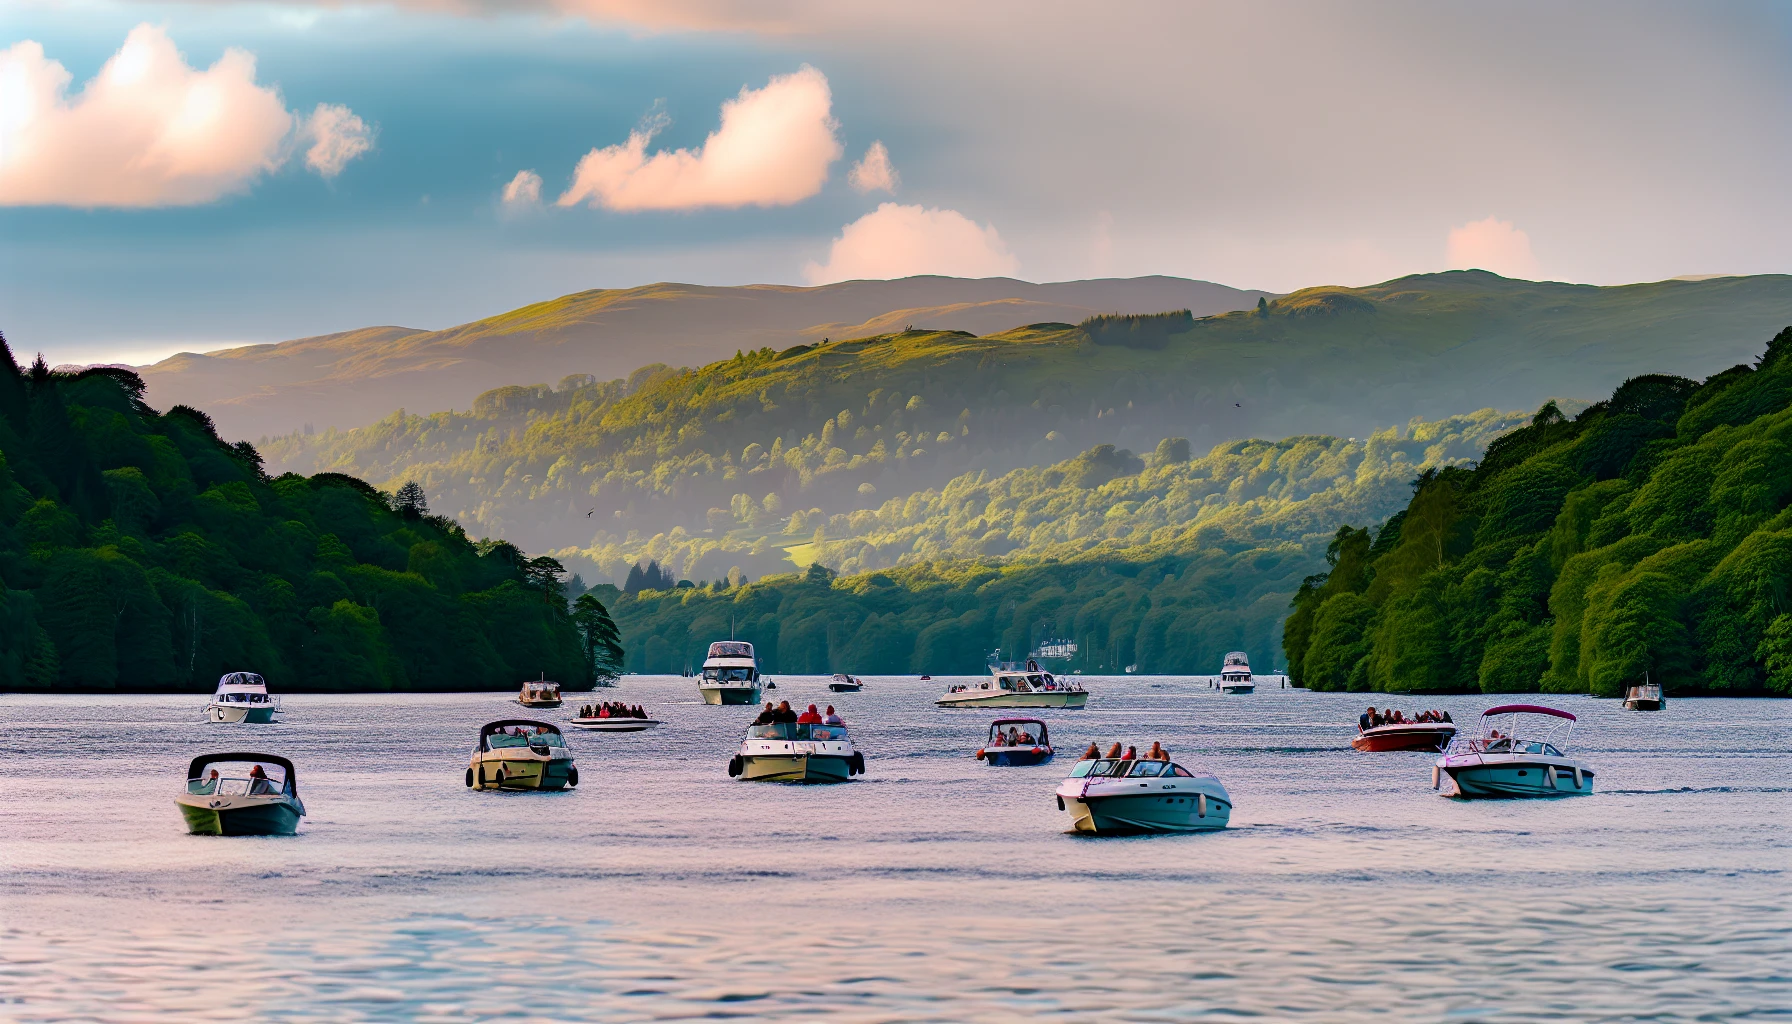 Scenic view of Windermere Lake with boats and surrounding hills